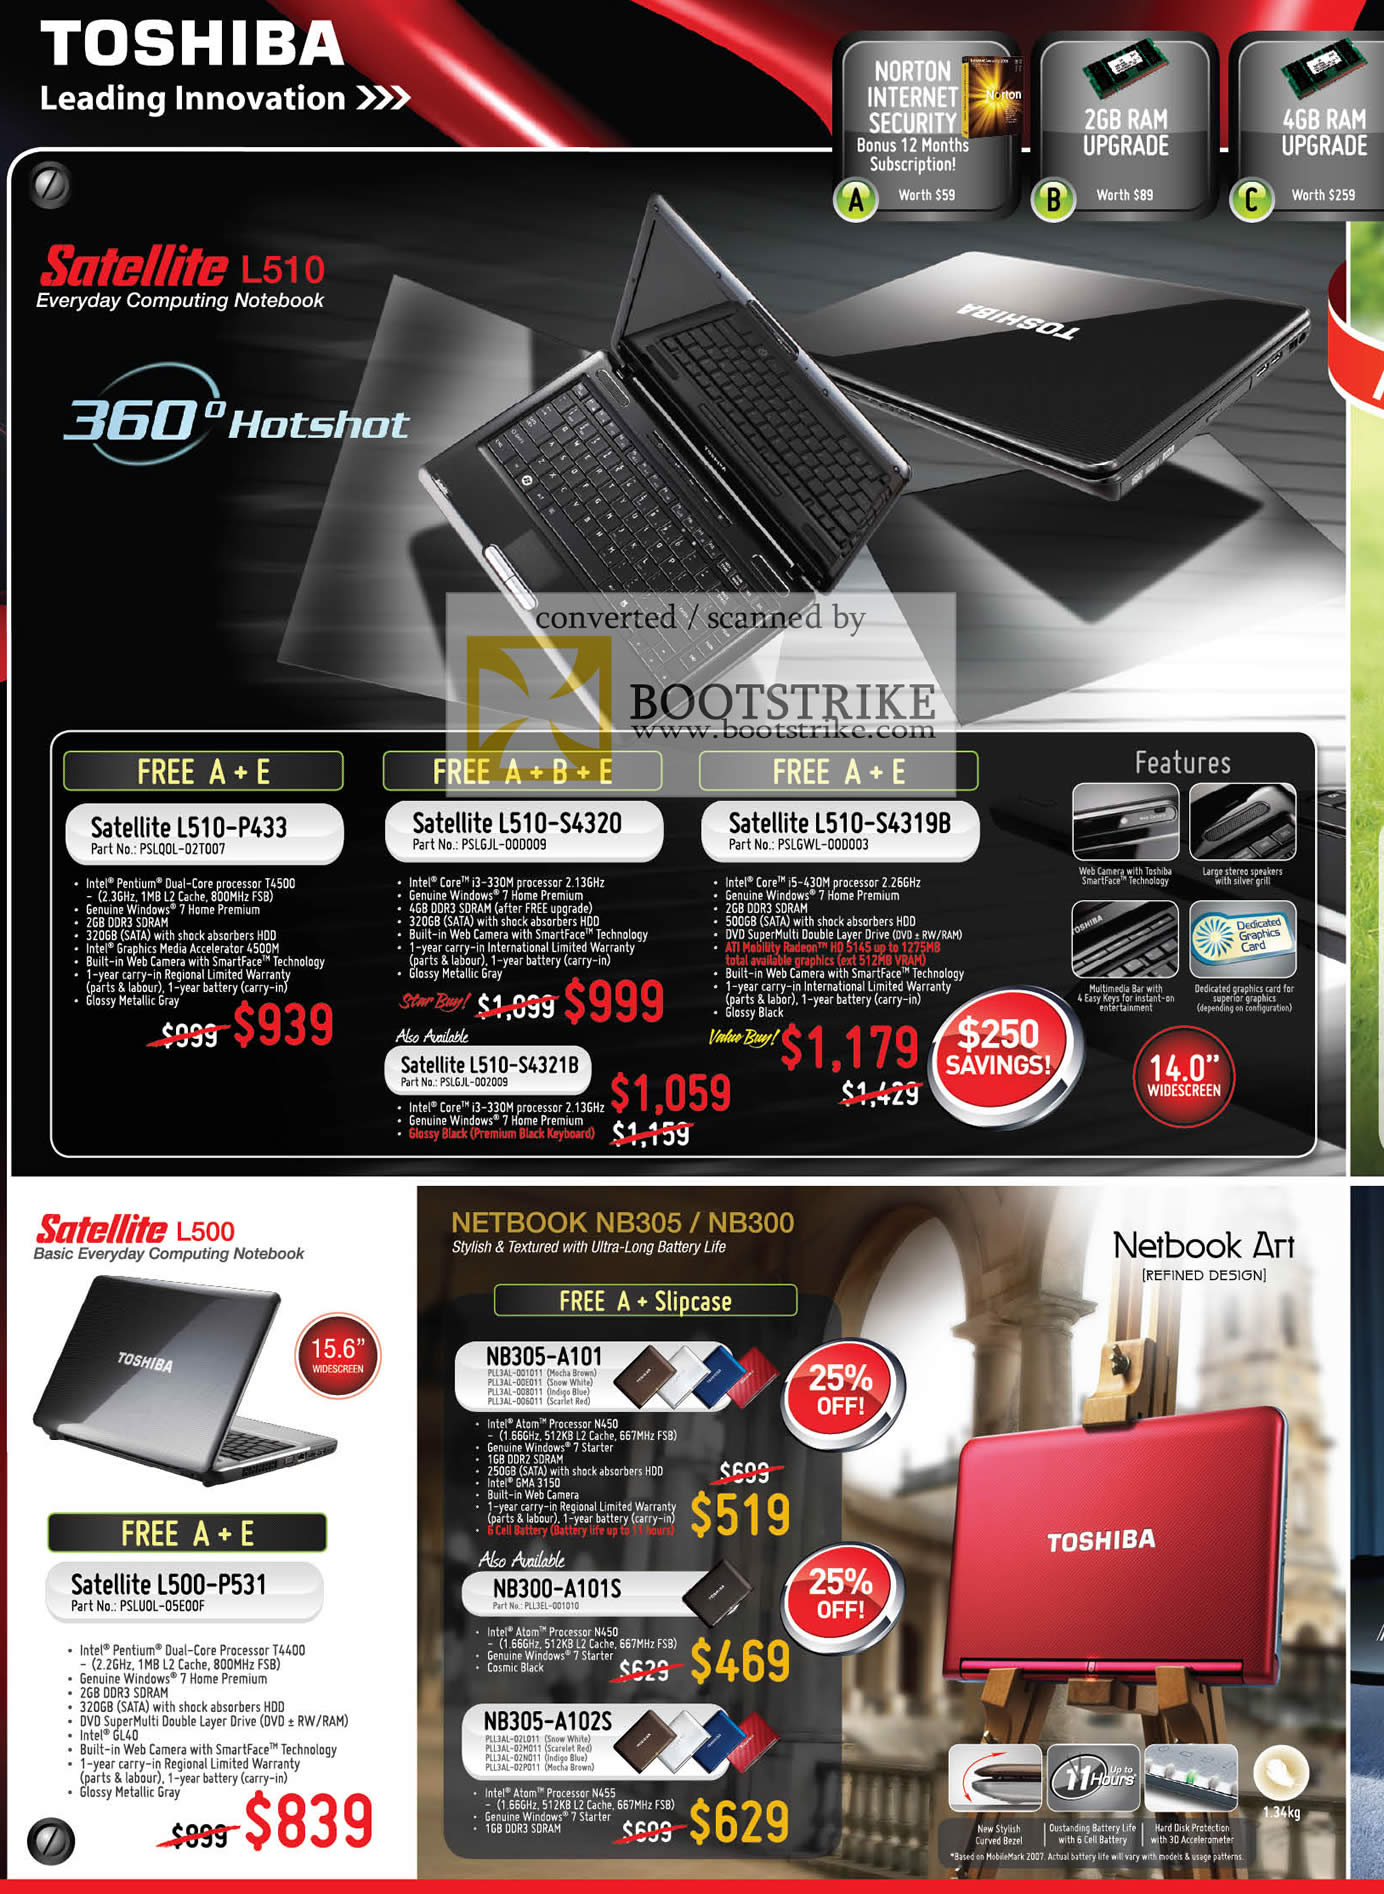 PC Show 2010 price list image brochure of Toshiba Notebooks Satellite L510 P433 S4320 S4918B L500 P531 Netbook NB305 A101 NB300 A101S A102S